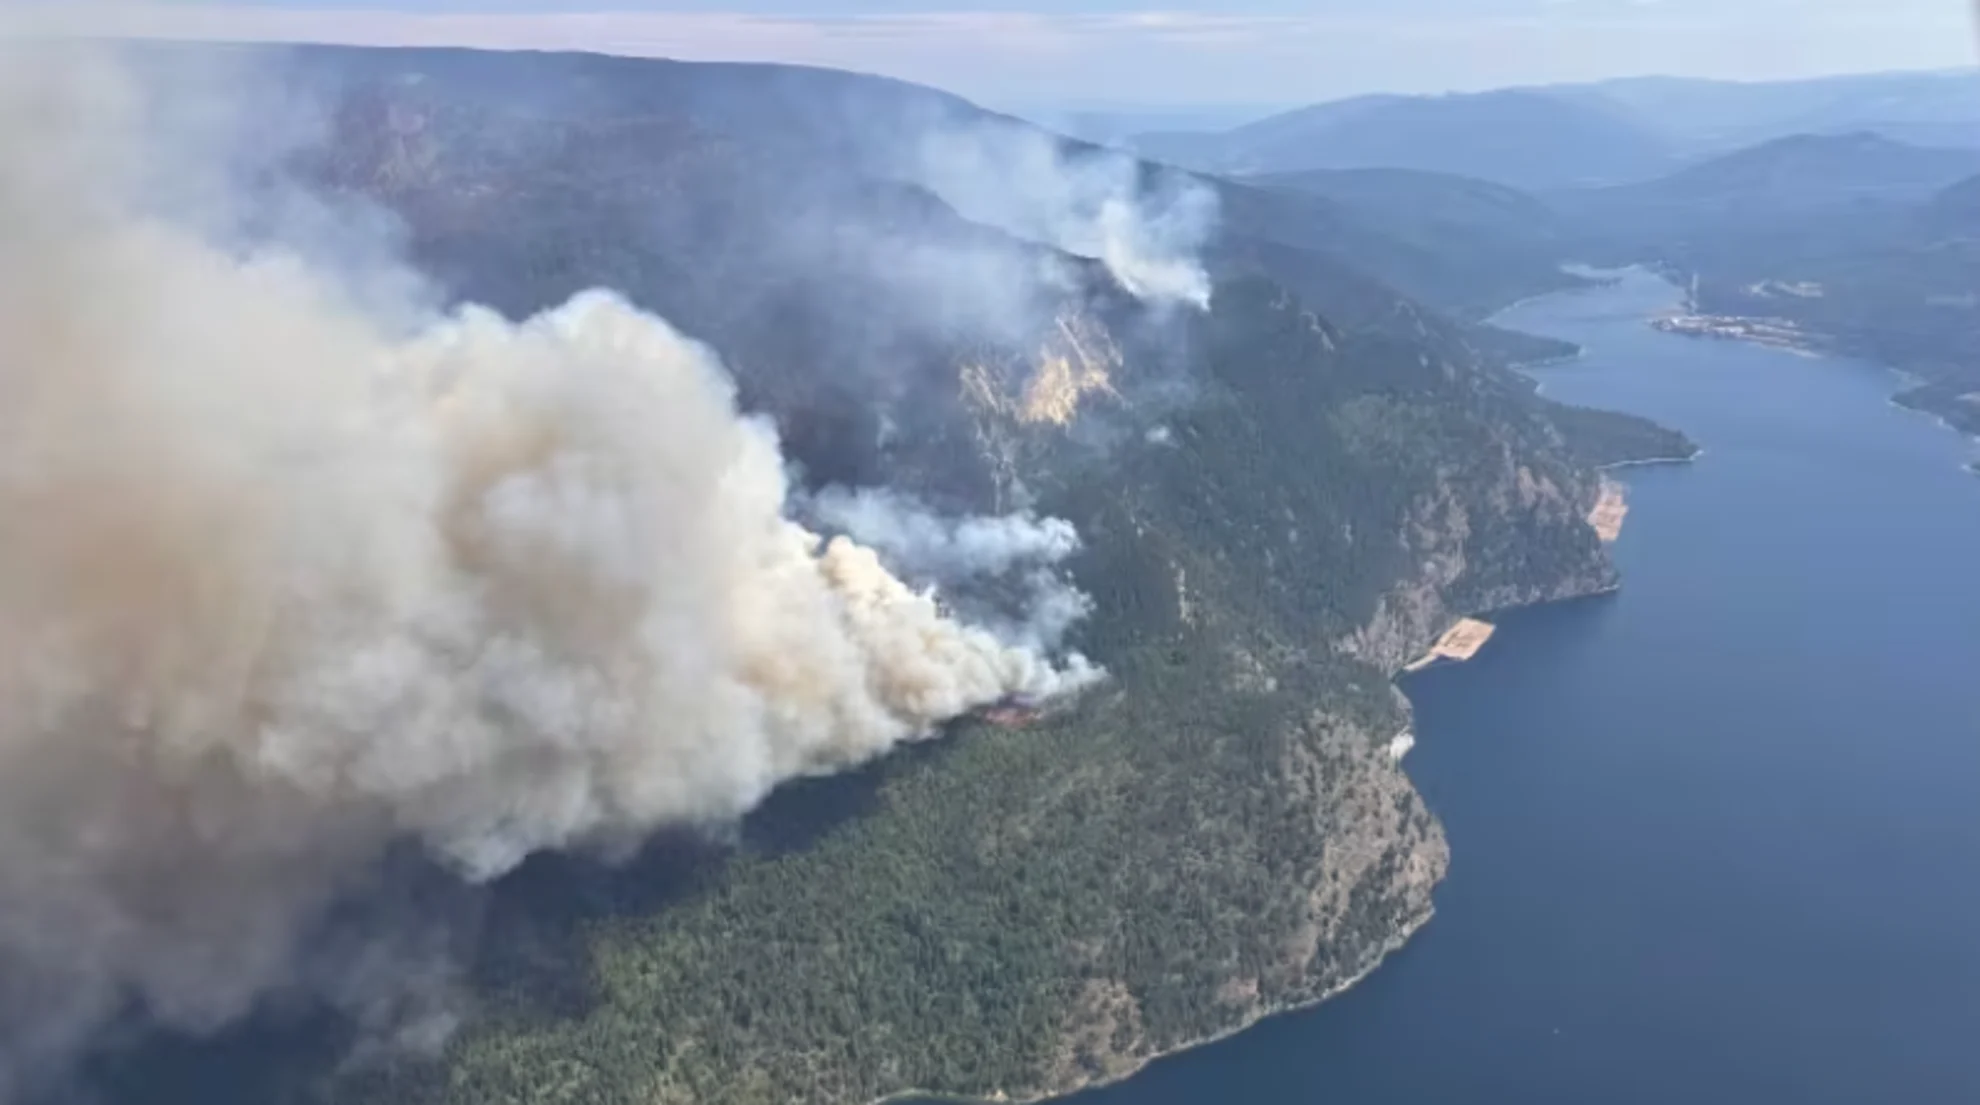 Residents in south-central B.C. ordered to evacuate. Only way out is by boat